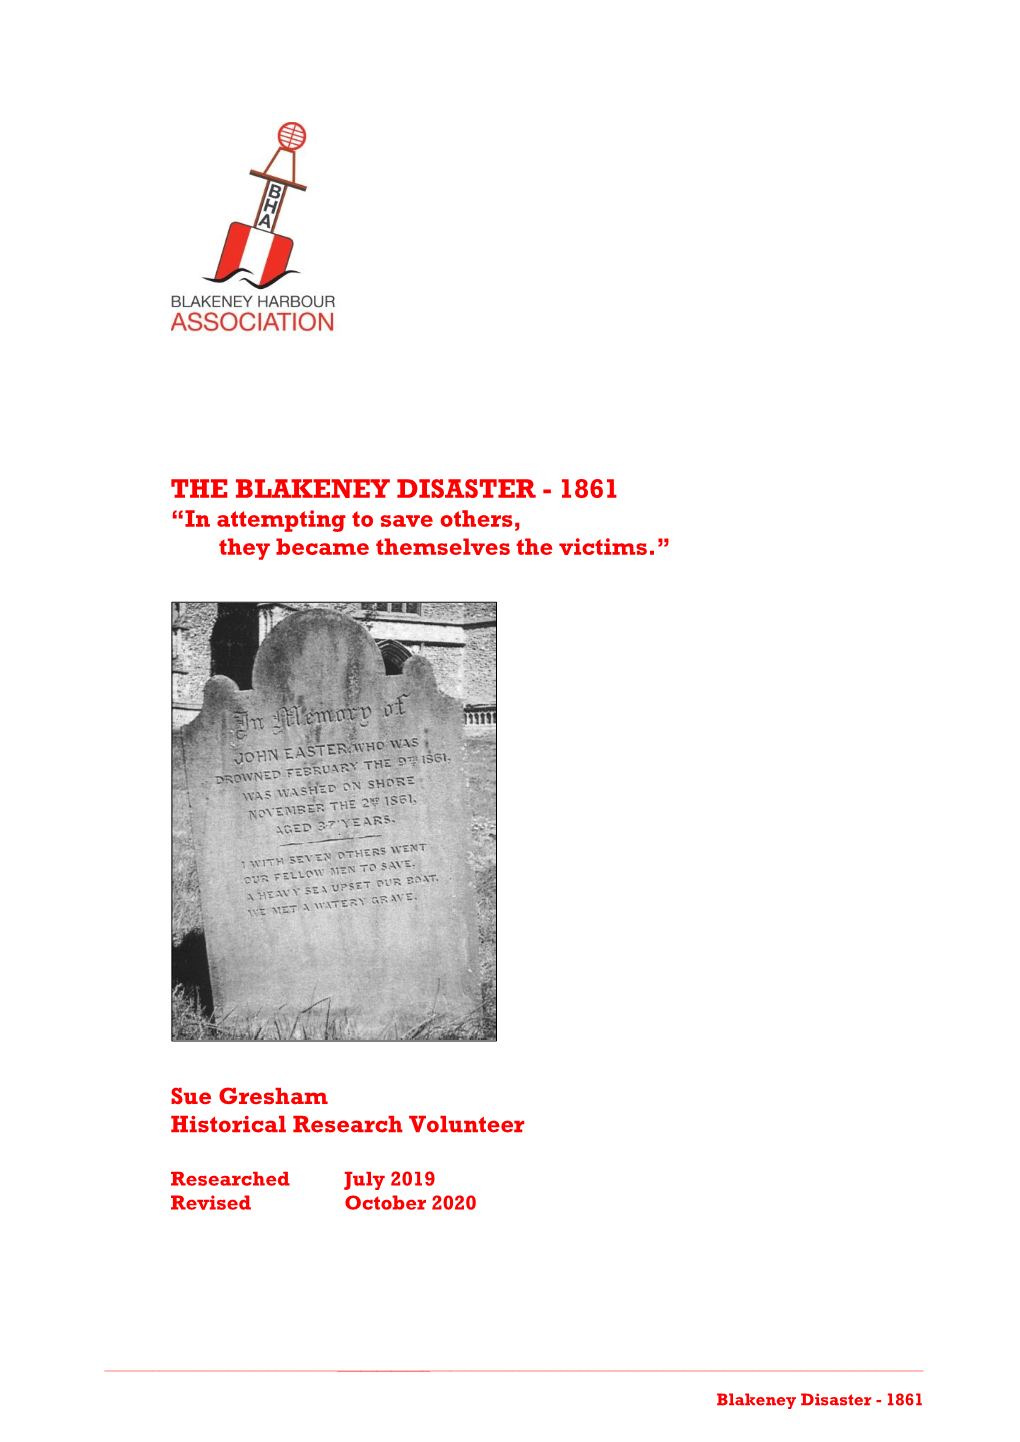 THE BLAKENEY DISASTER - 1861 “In Attempting to Save Others, They Became Themselves the Victims.”